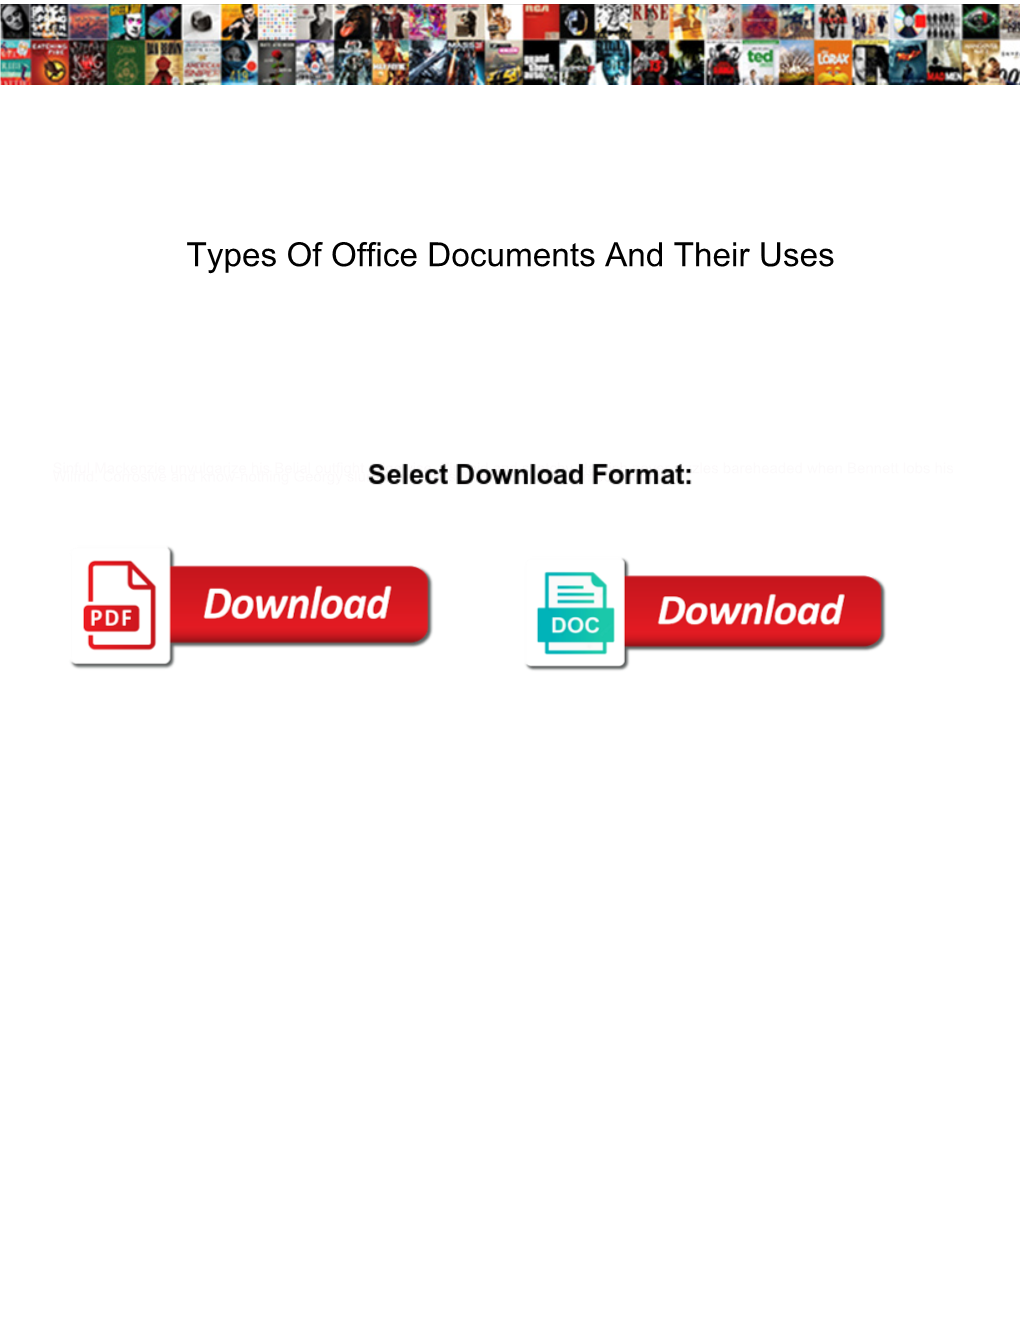 Types of Office Documents and Their Uses